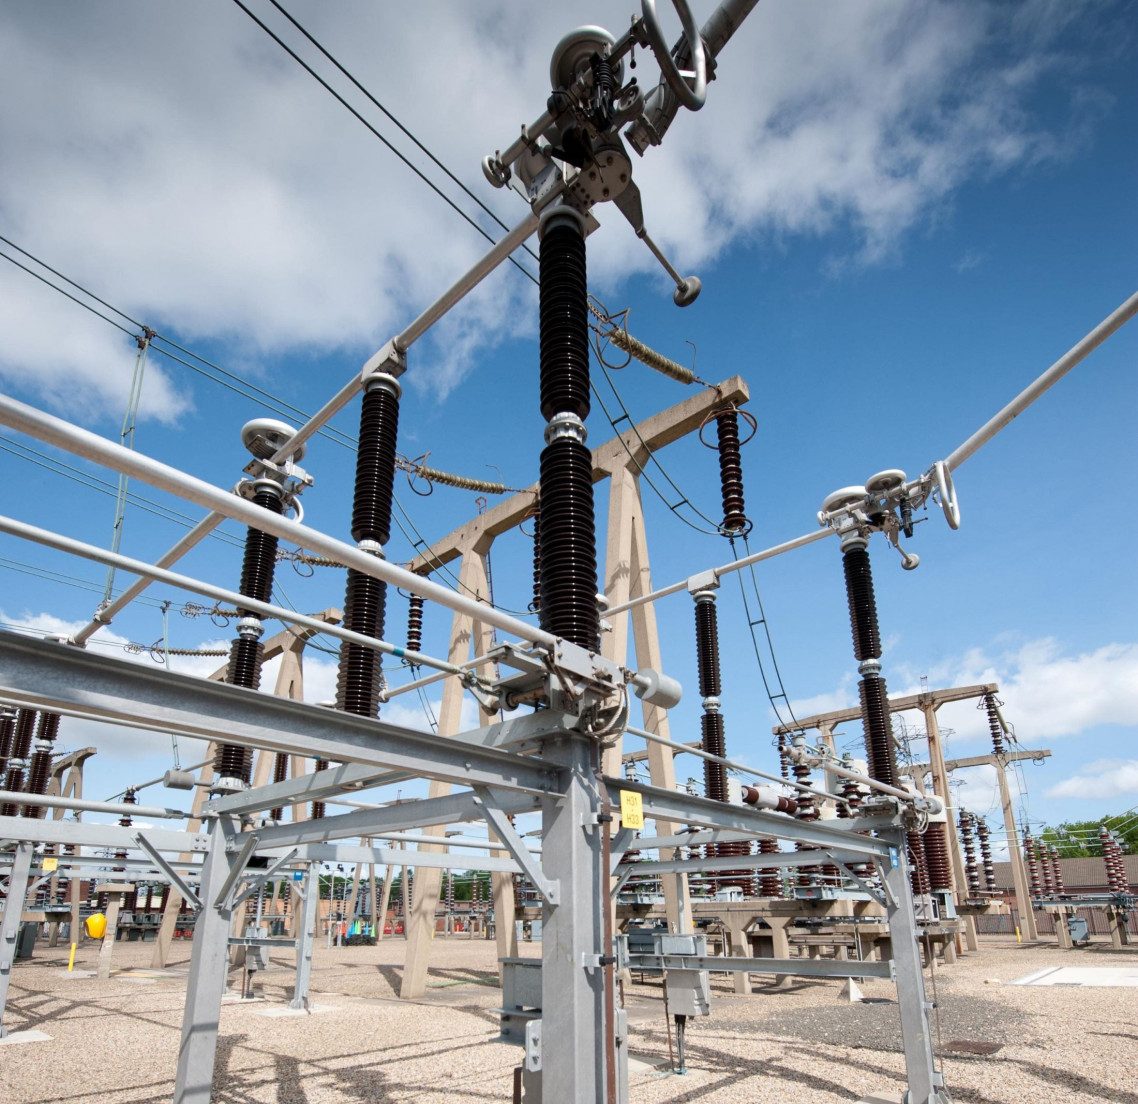 An onshore substation as a part of an electrical power transmission & distribution network.